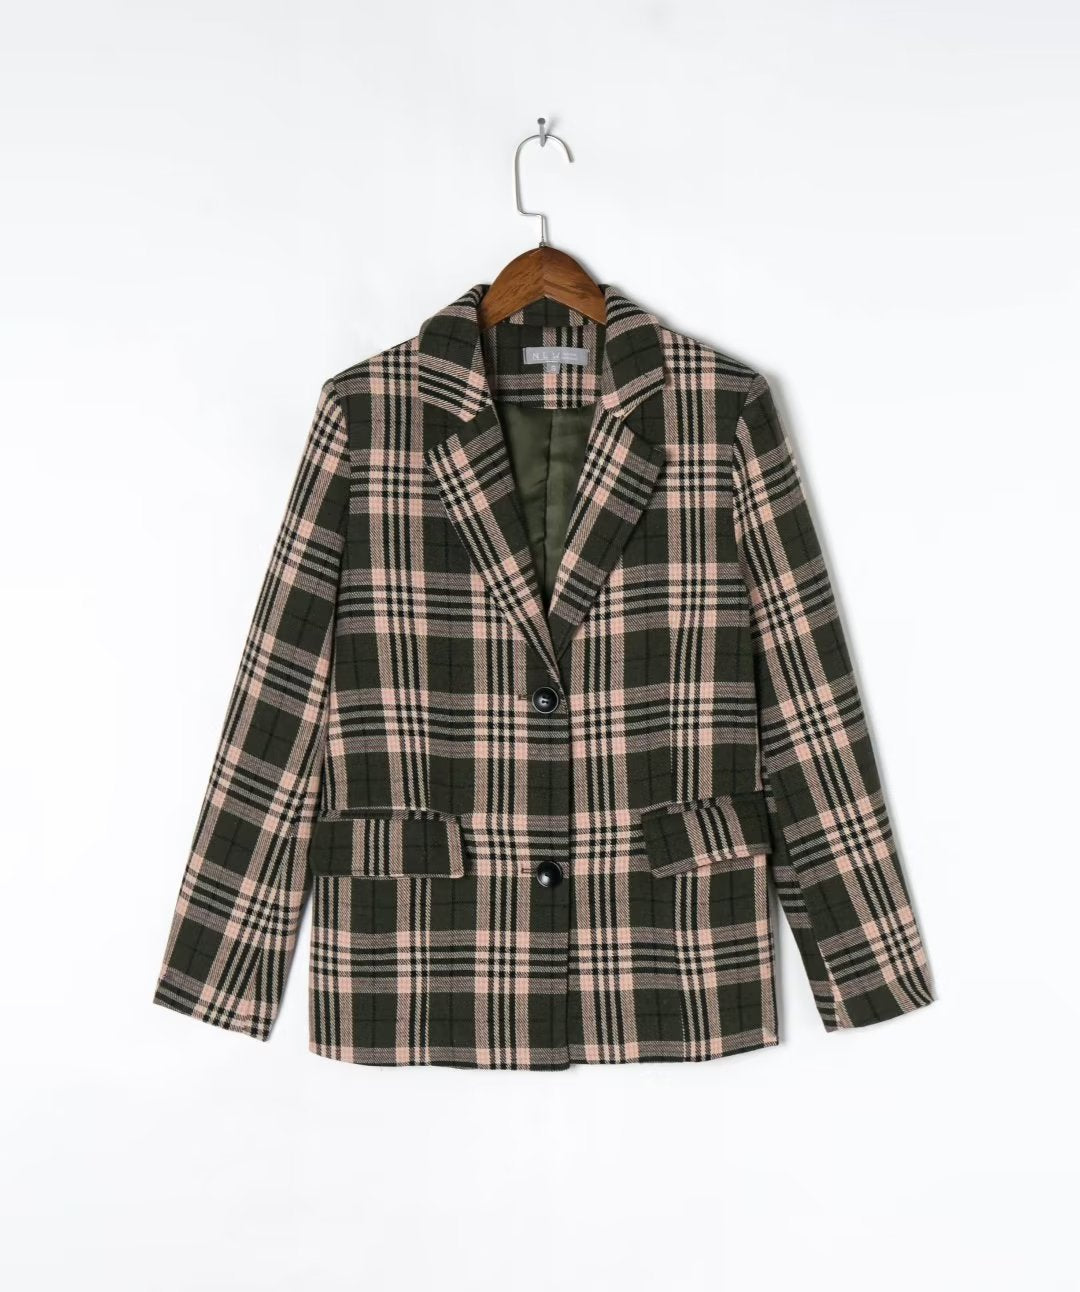 Fall Olive Green Plaid Padded Shoulder Collared Loose Blazer Elegant Casual Plaid Top